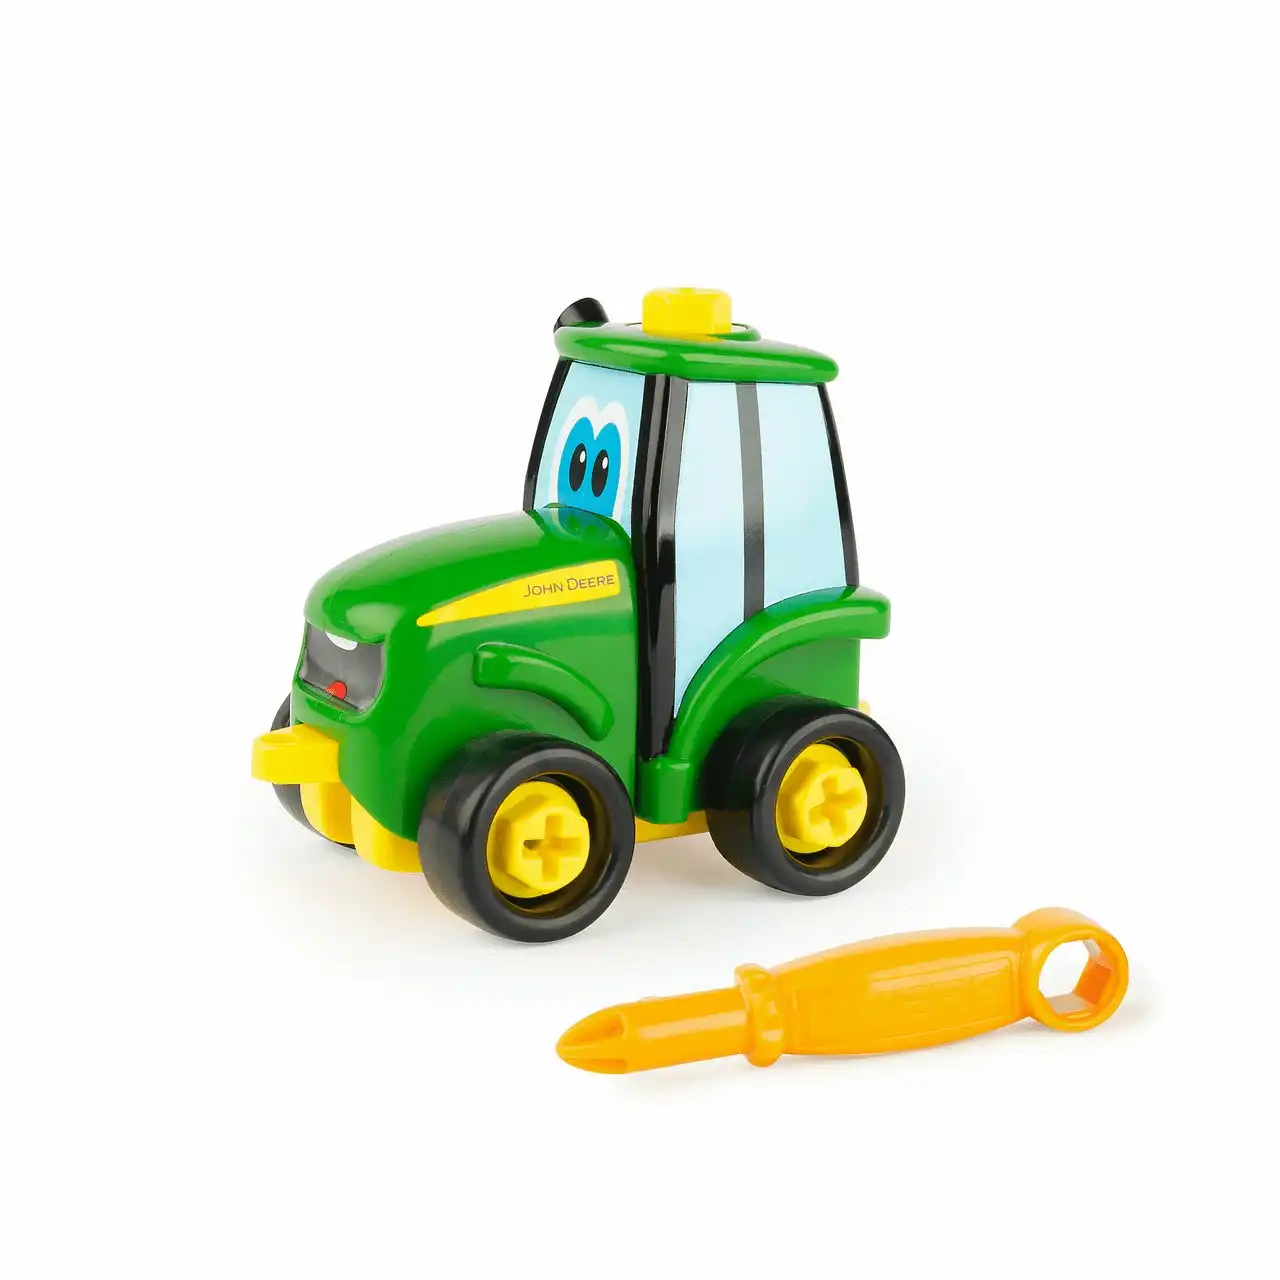 John Deere - Build-a-Buddy Tractor and Screwdriver